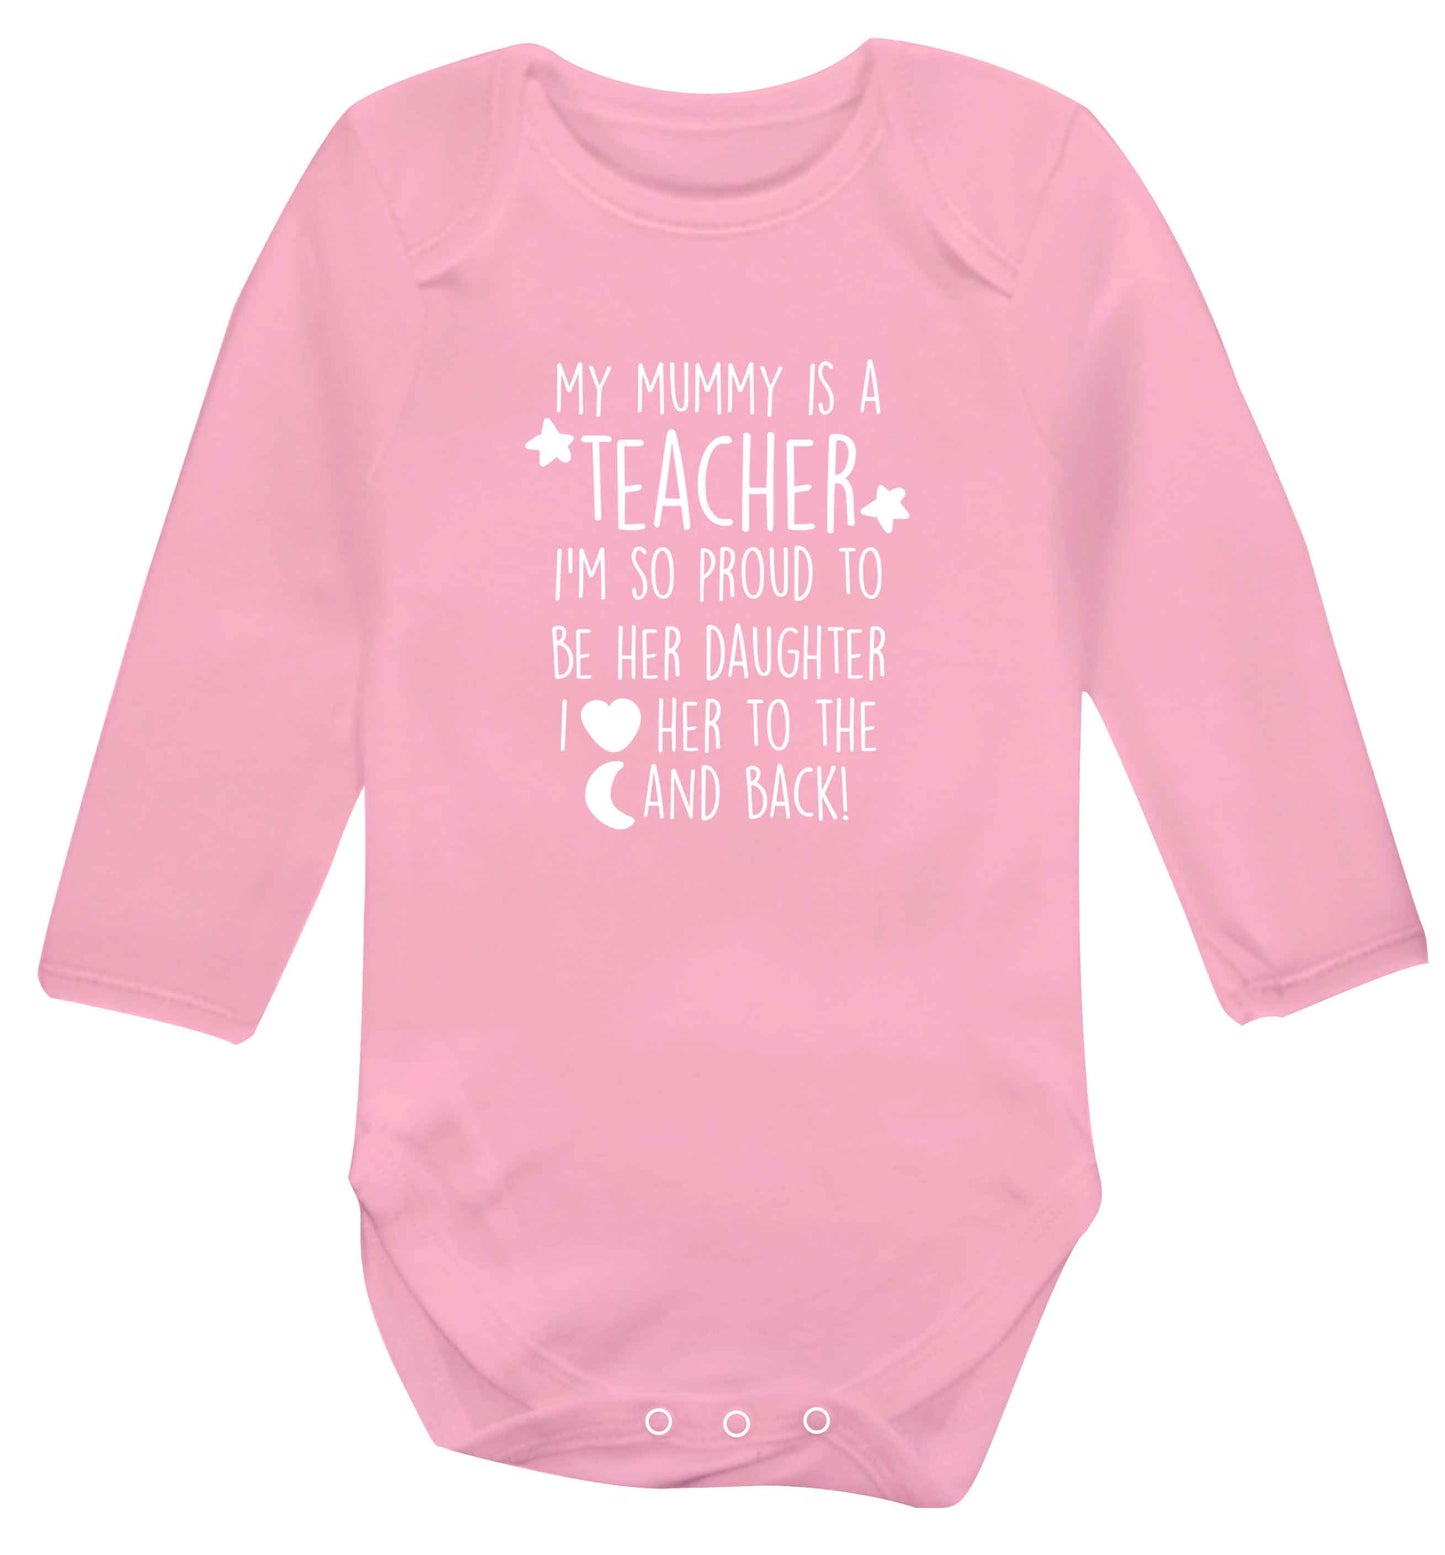 My mummy is a teacher I'm so proud to be her daughter I love her to the moon and back baby vest long sleeved pale pink 6-12 months